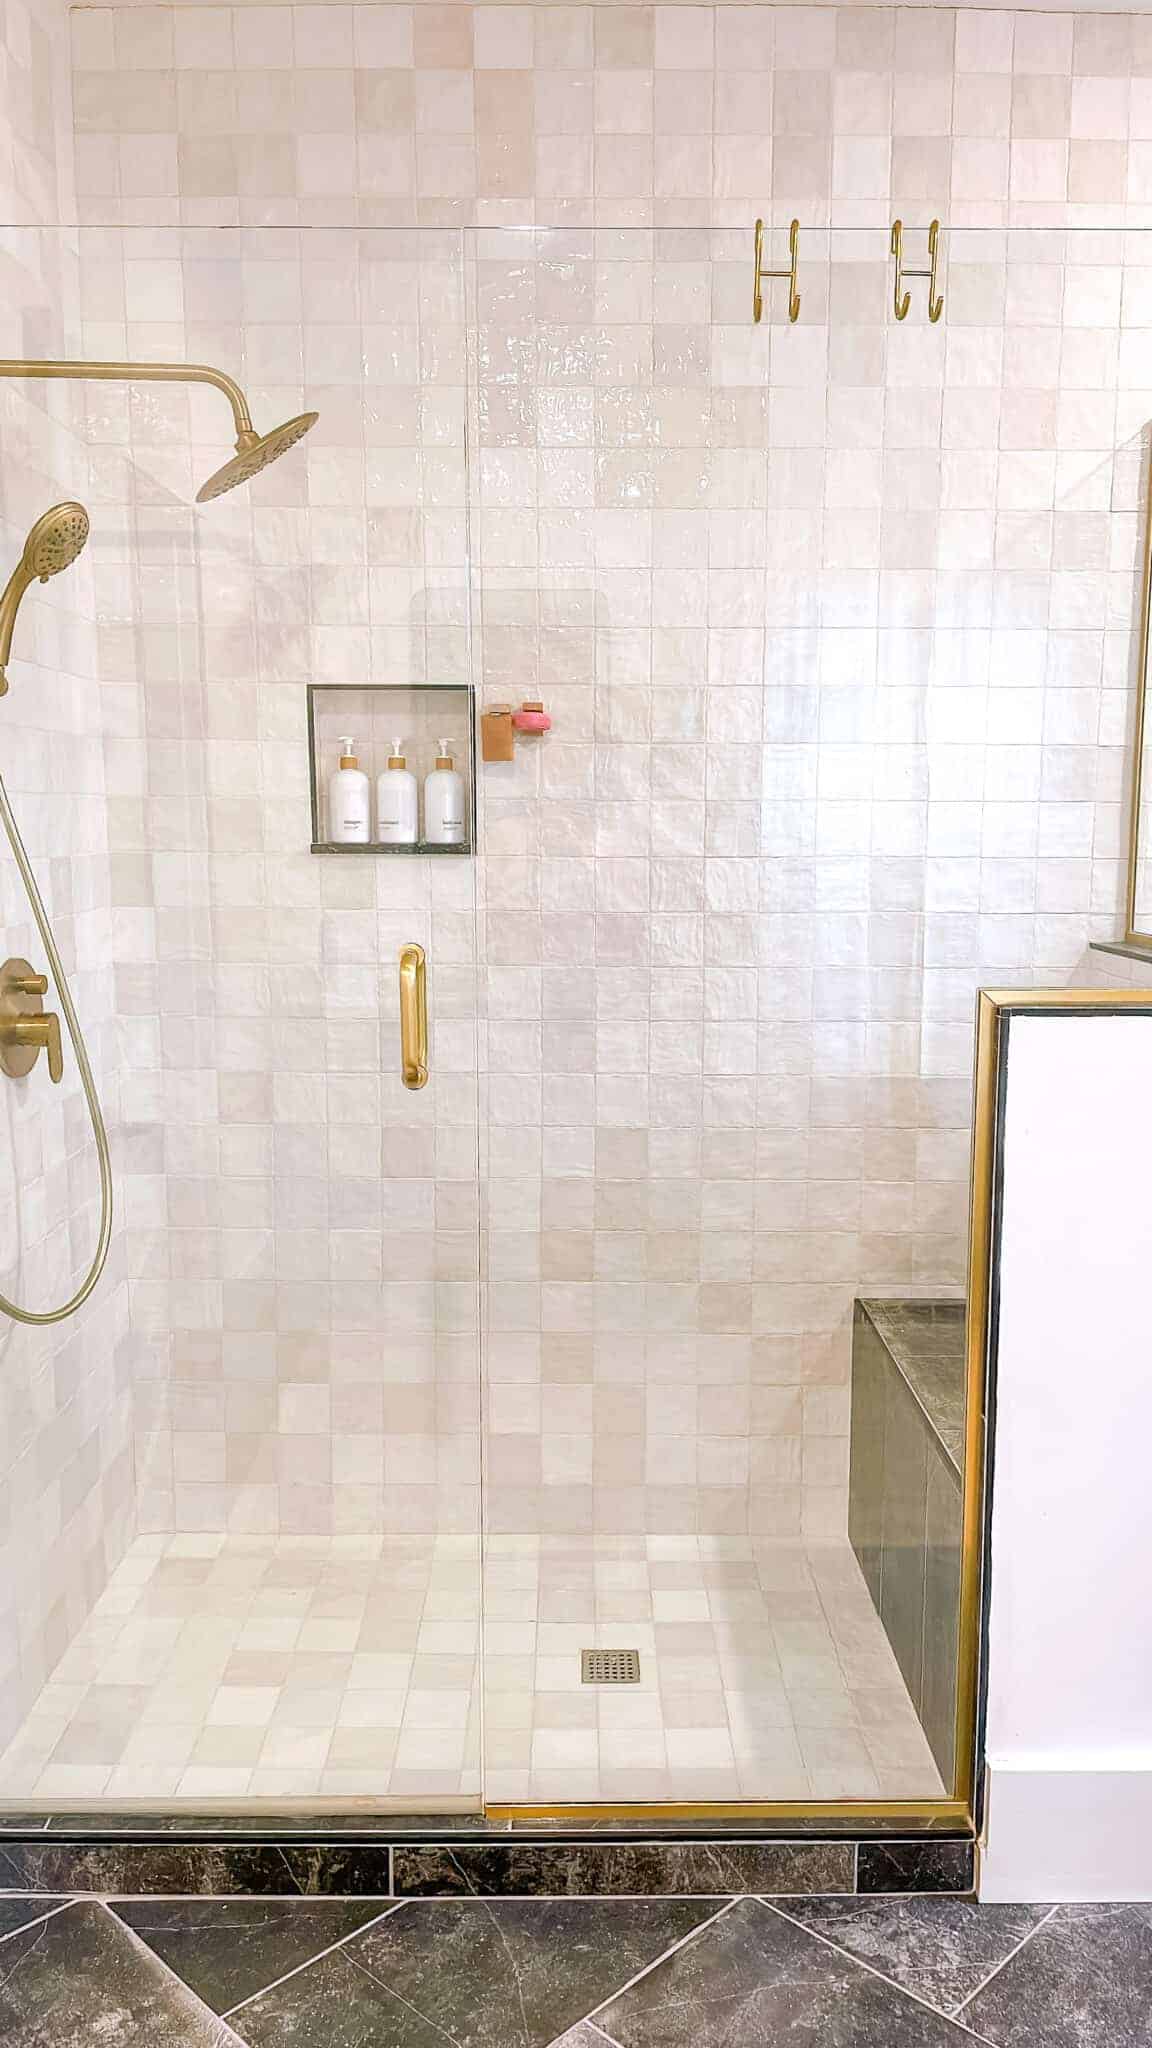 What are Shower Trays? How to Decide the Right One for Your Bathroom?